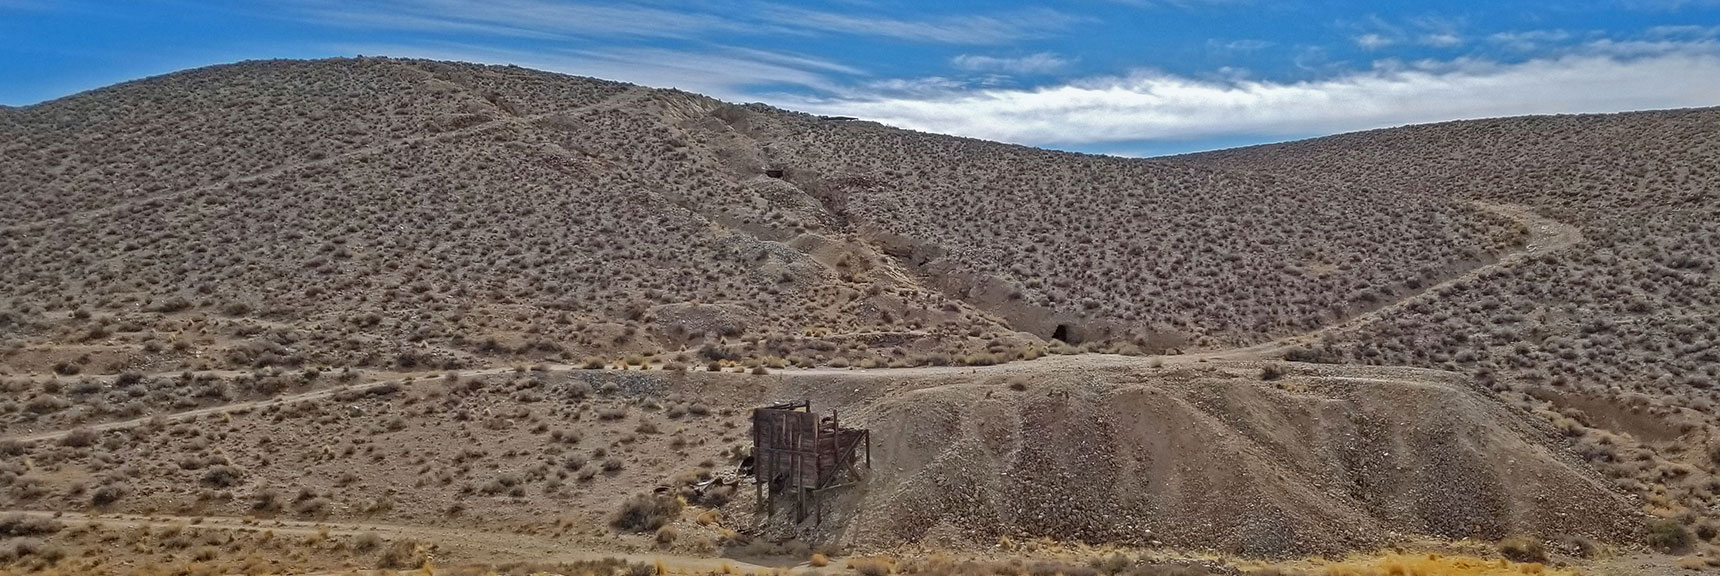 1000 Mines in These Hills! | Skidoo Stamp Mill, Panamint Mountains, Death Valley National Park, CA